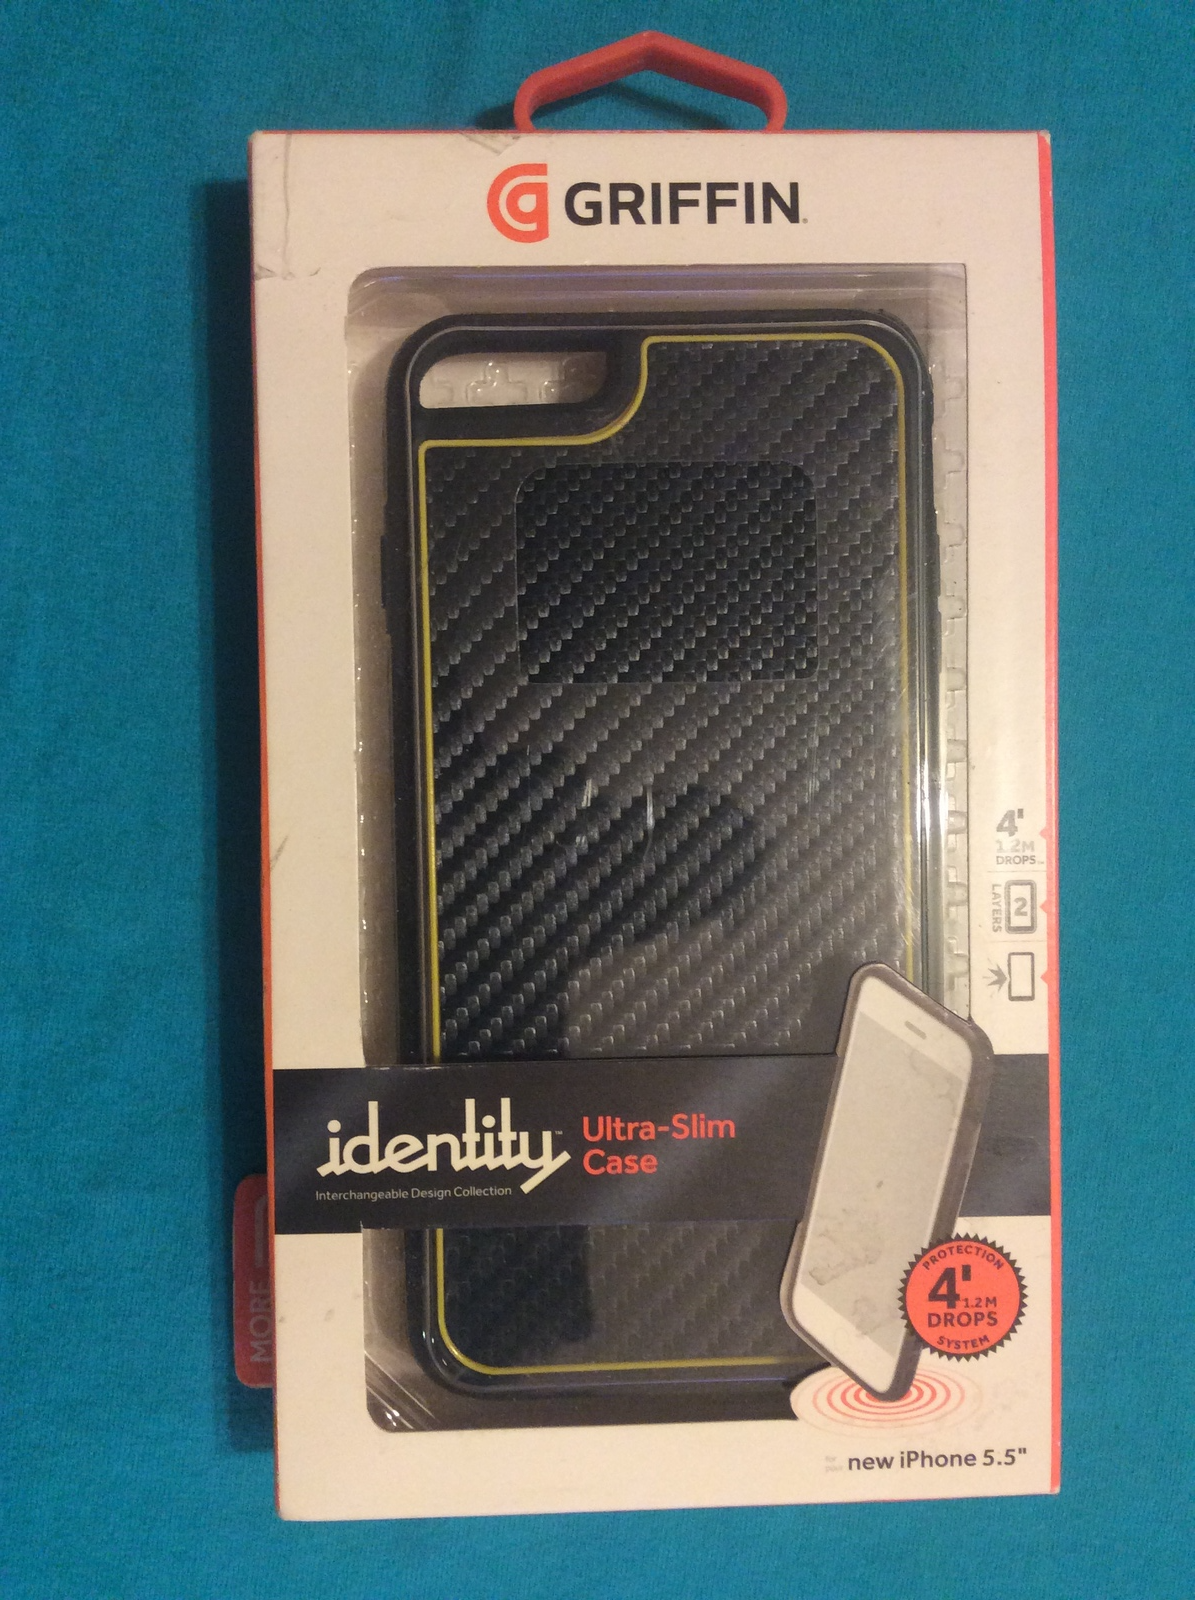 Primary image for GRIFFIN identity Ultra-Slim Case - iPhone 5.5 - BLACK - NEW IN BOX - Free Ship